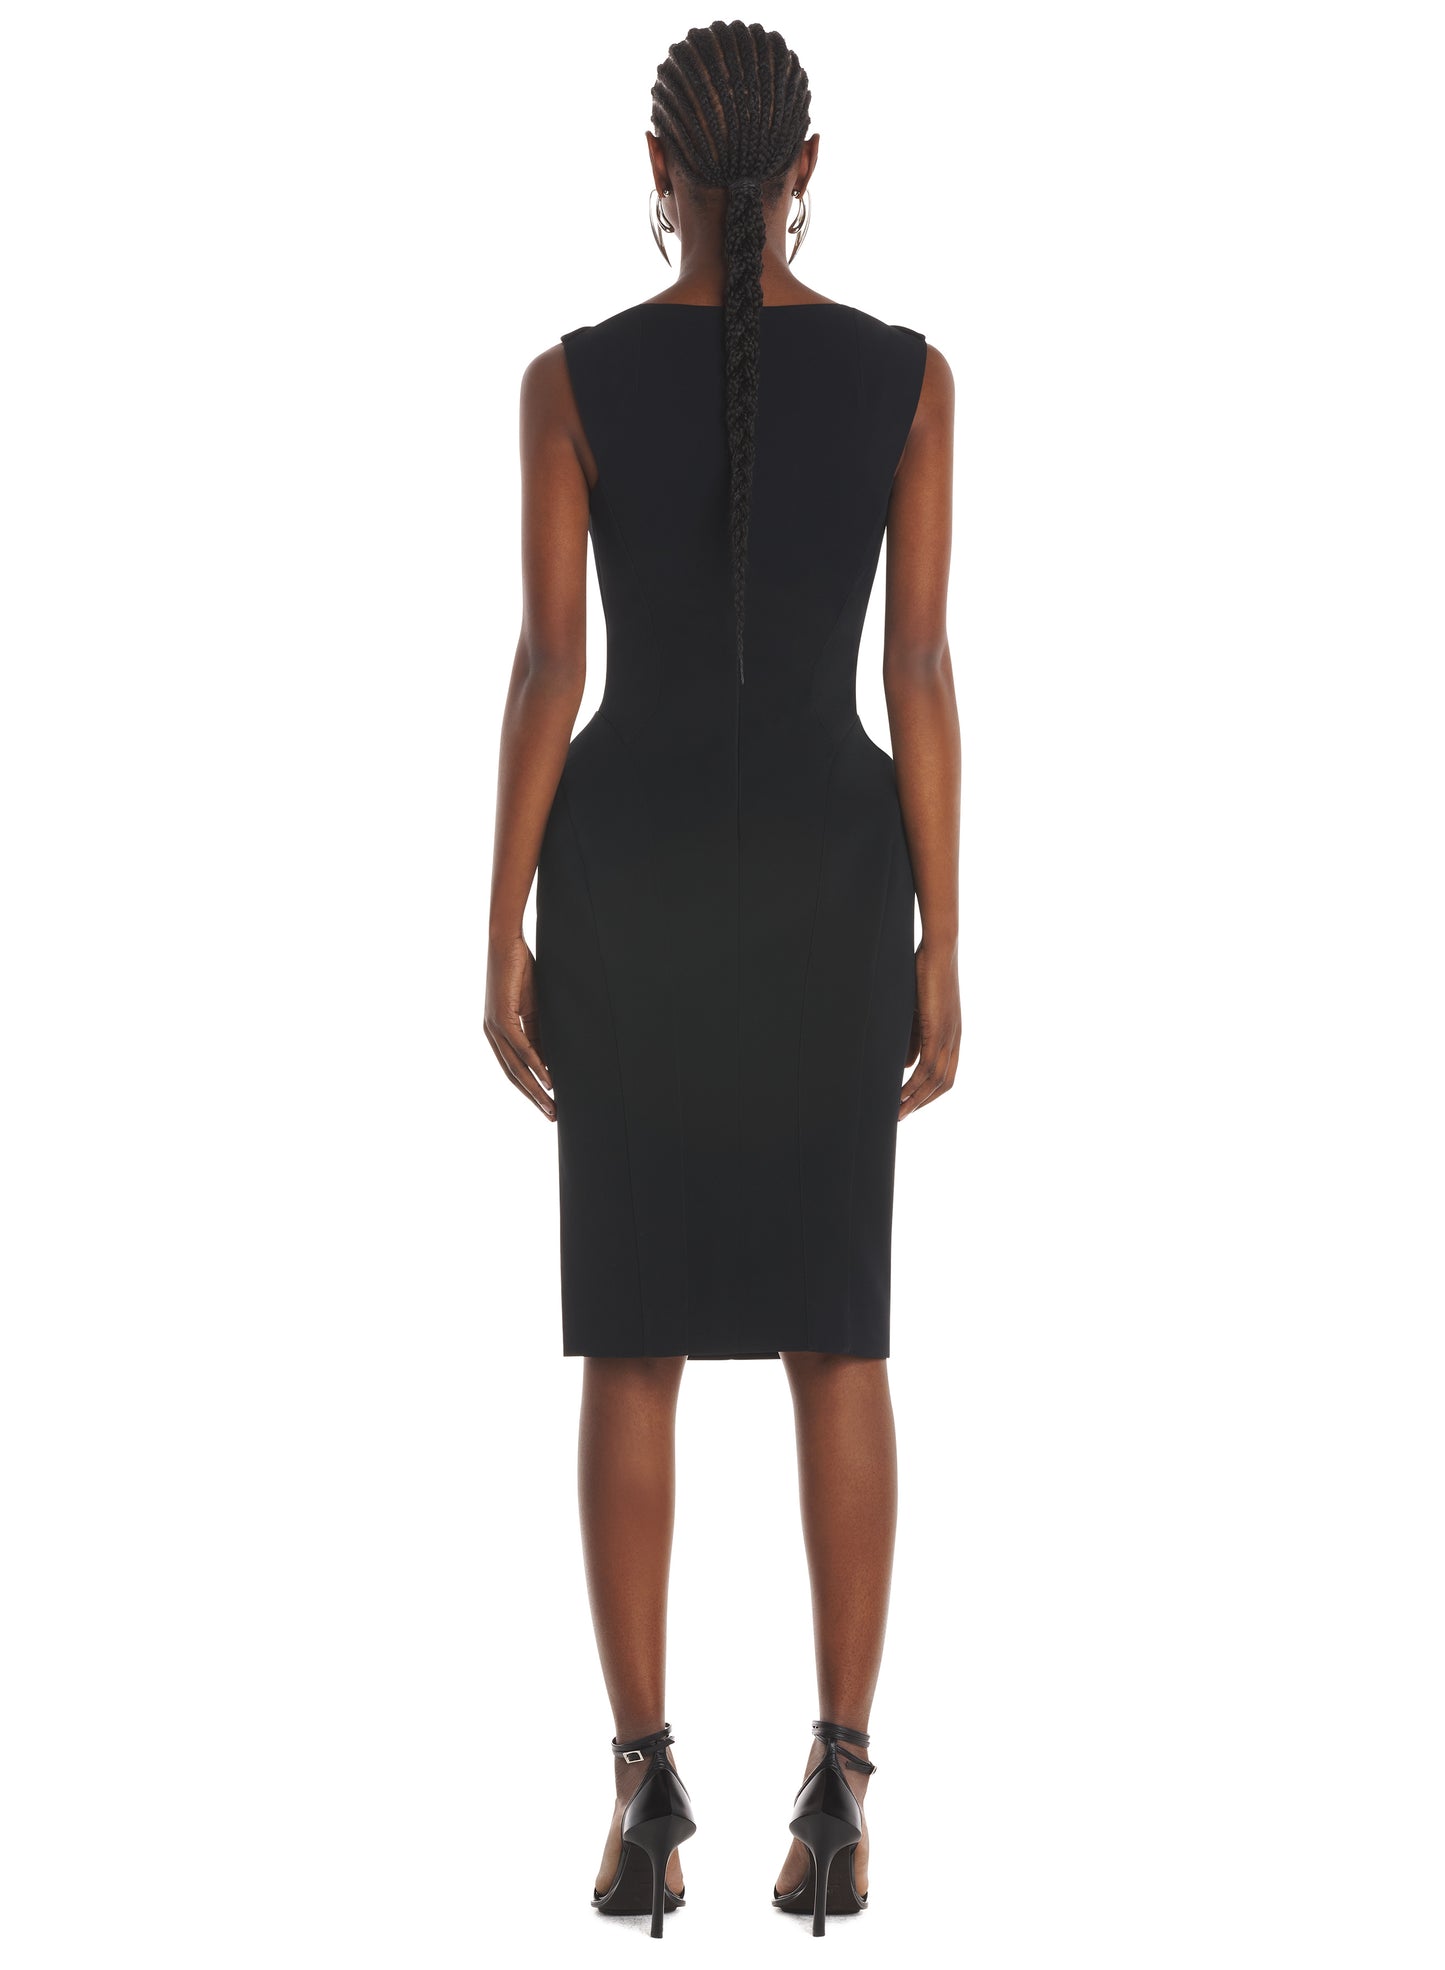 Tailored boat neck dress